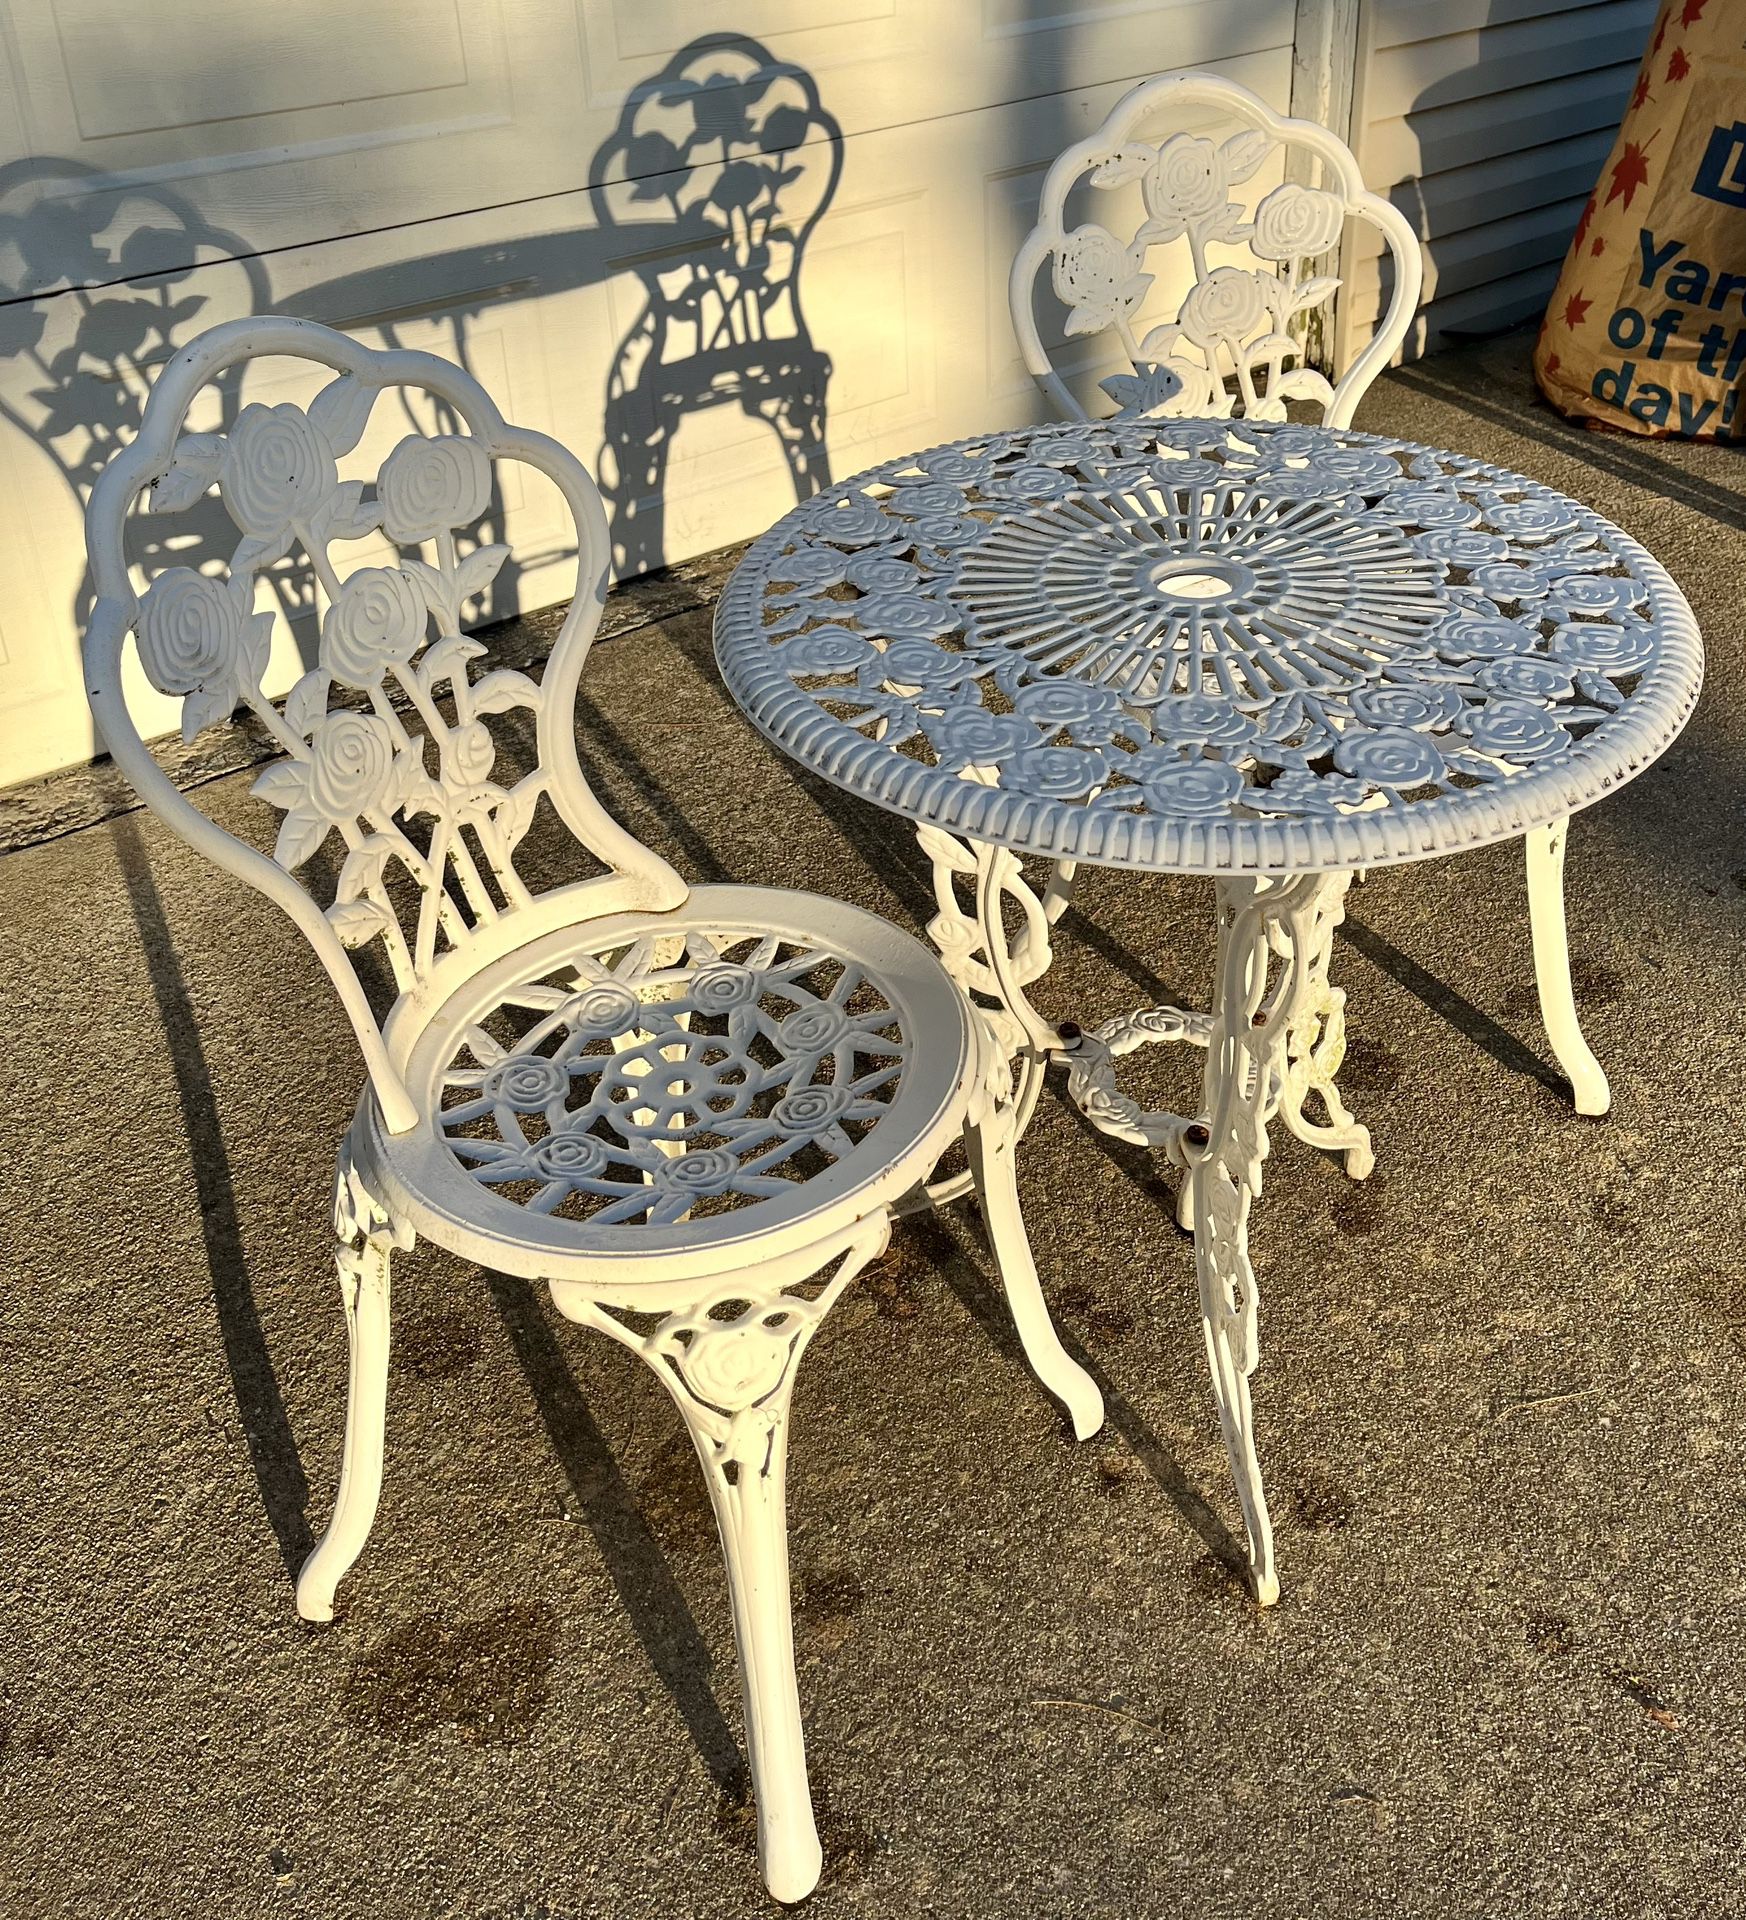 Outdoor FURNITURE | Wrought Iron Patio / Garden Table and Chairs. I cannot deliver you would need to arrange your own transport.